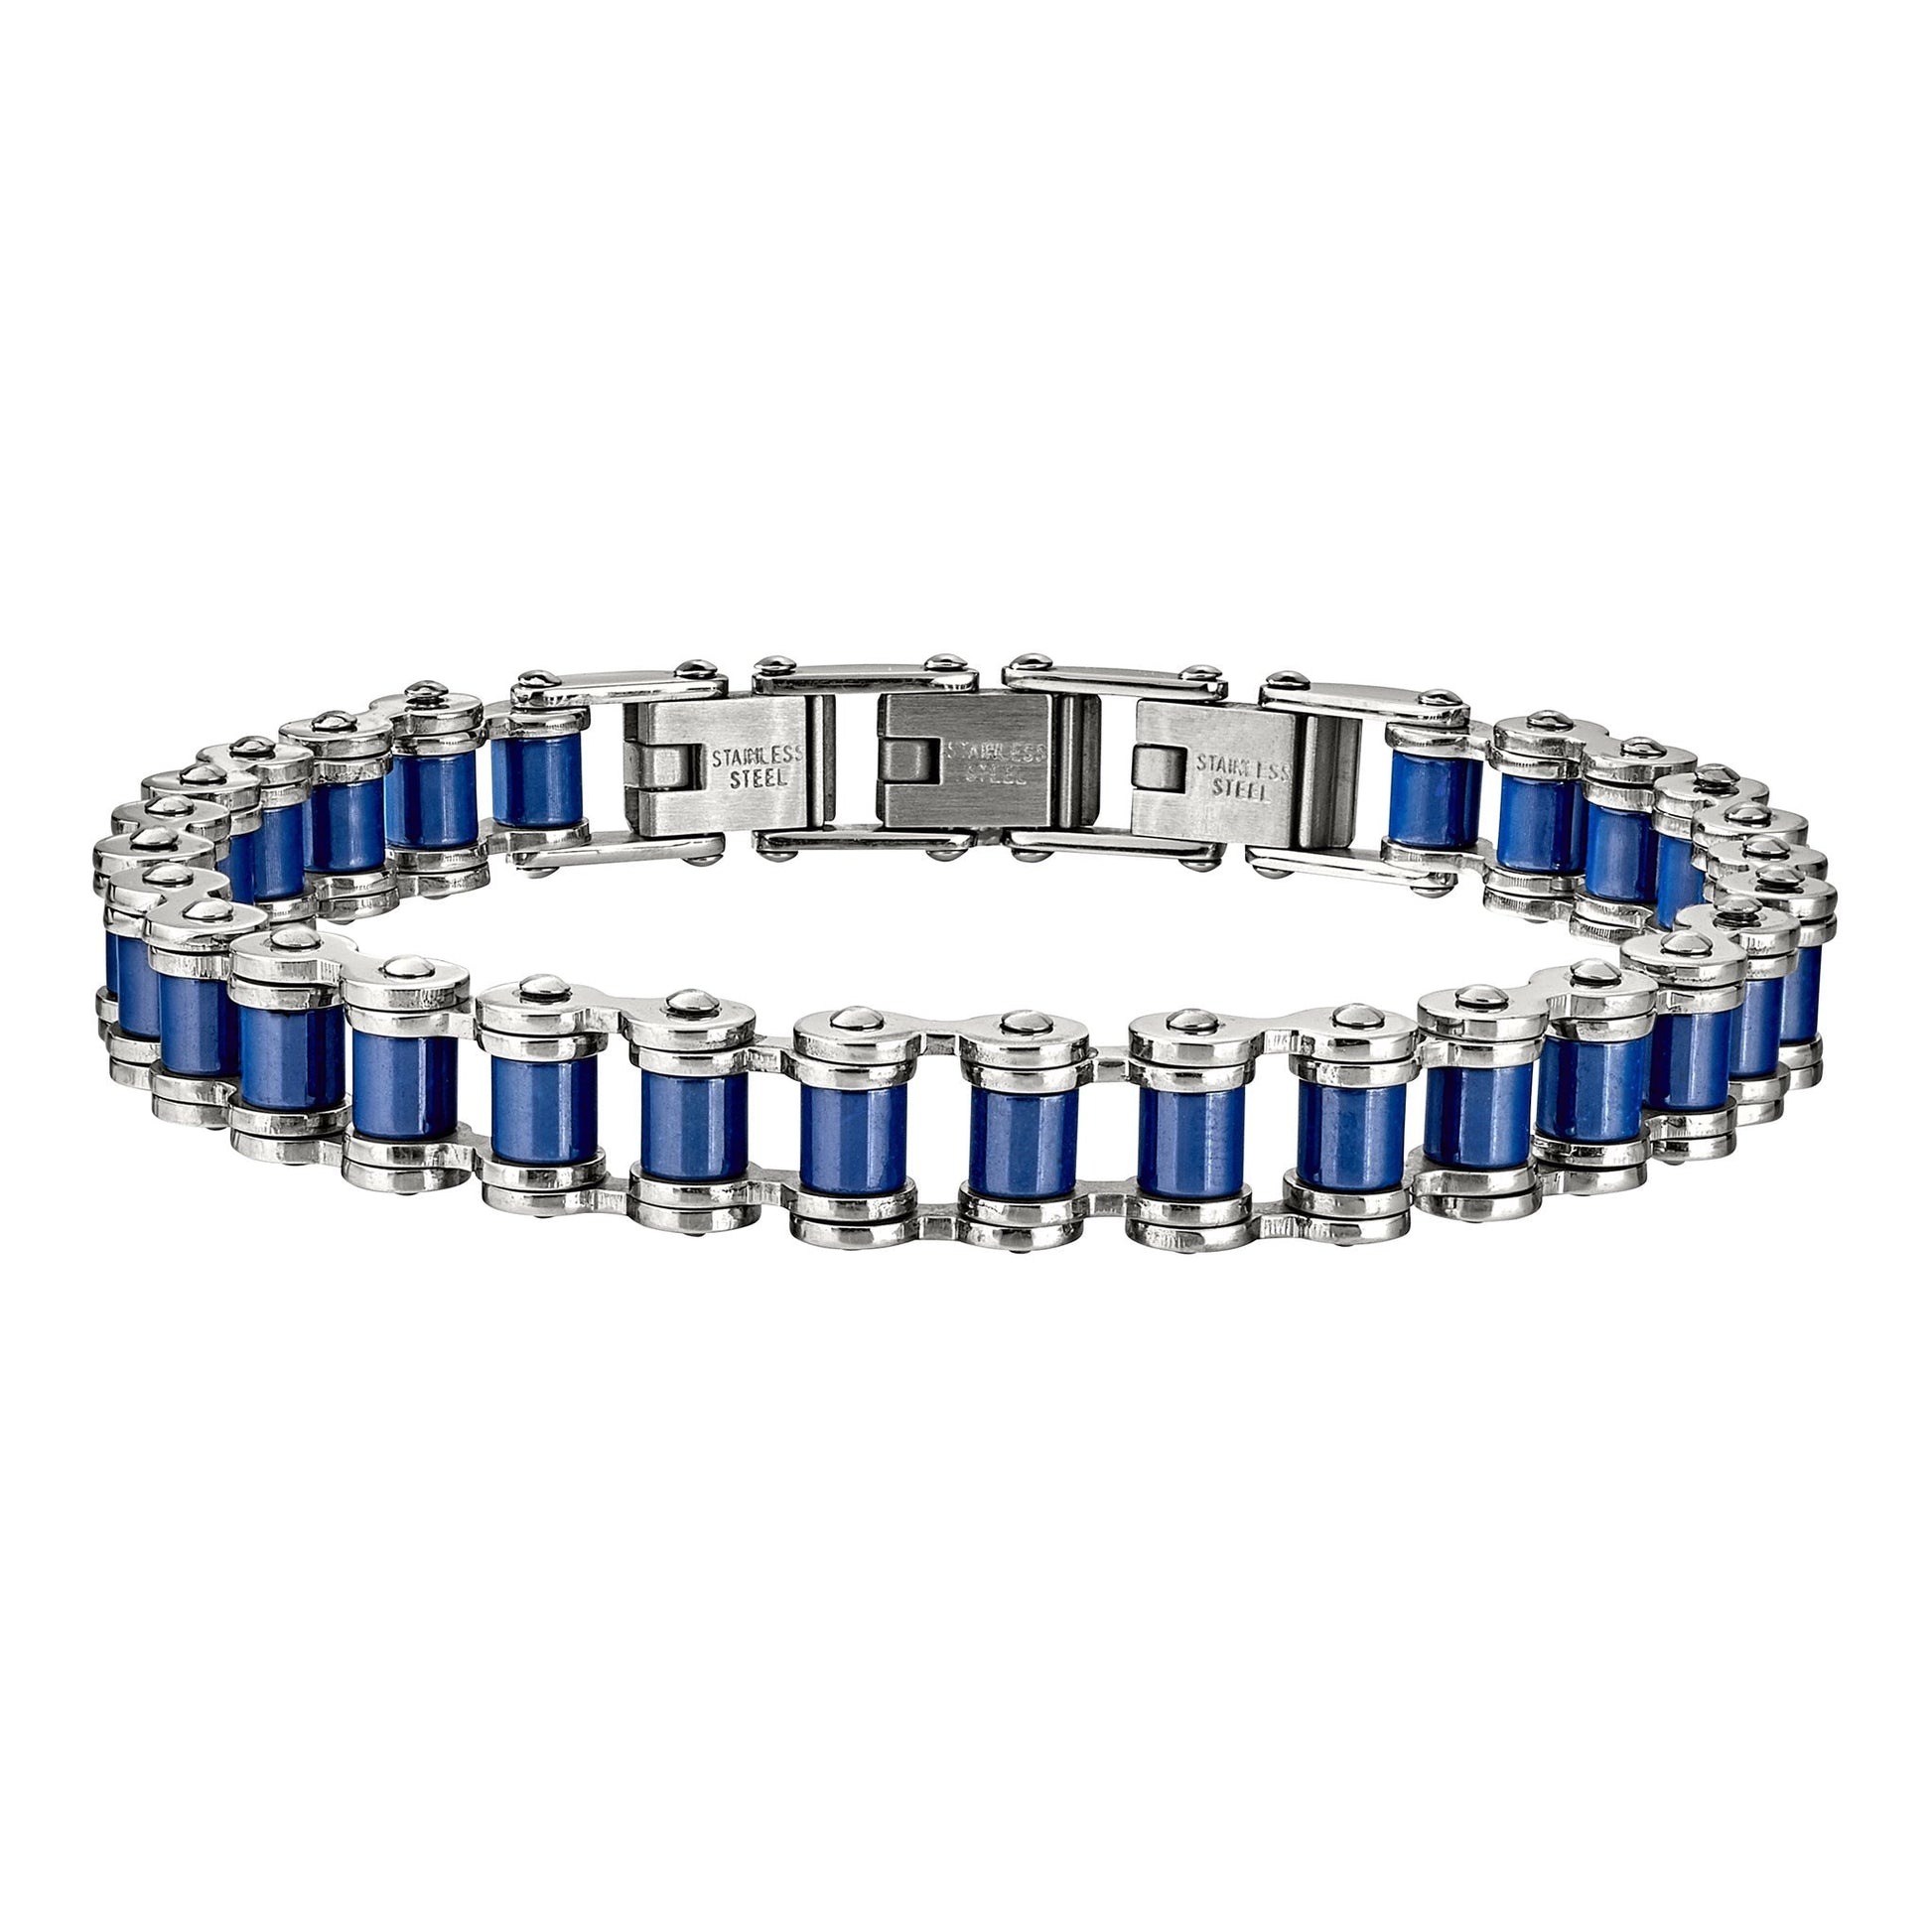 A blue & silver stainless steel biker chain bracelet displayed on a neutral white background.